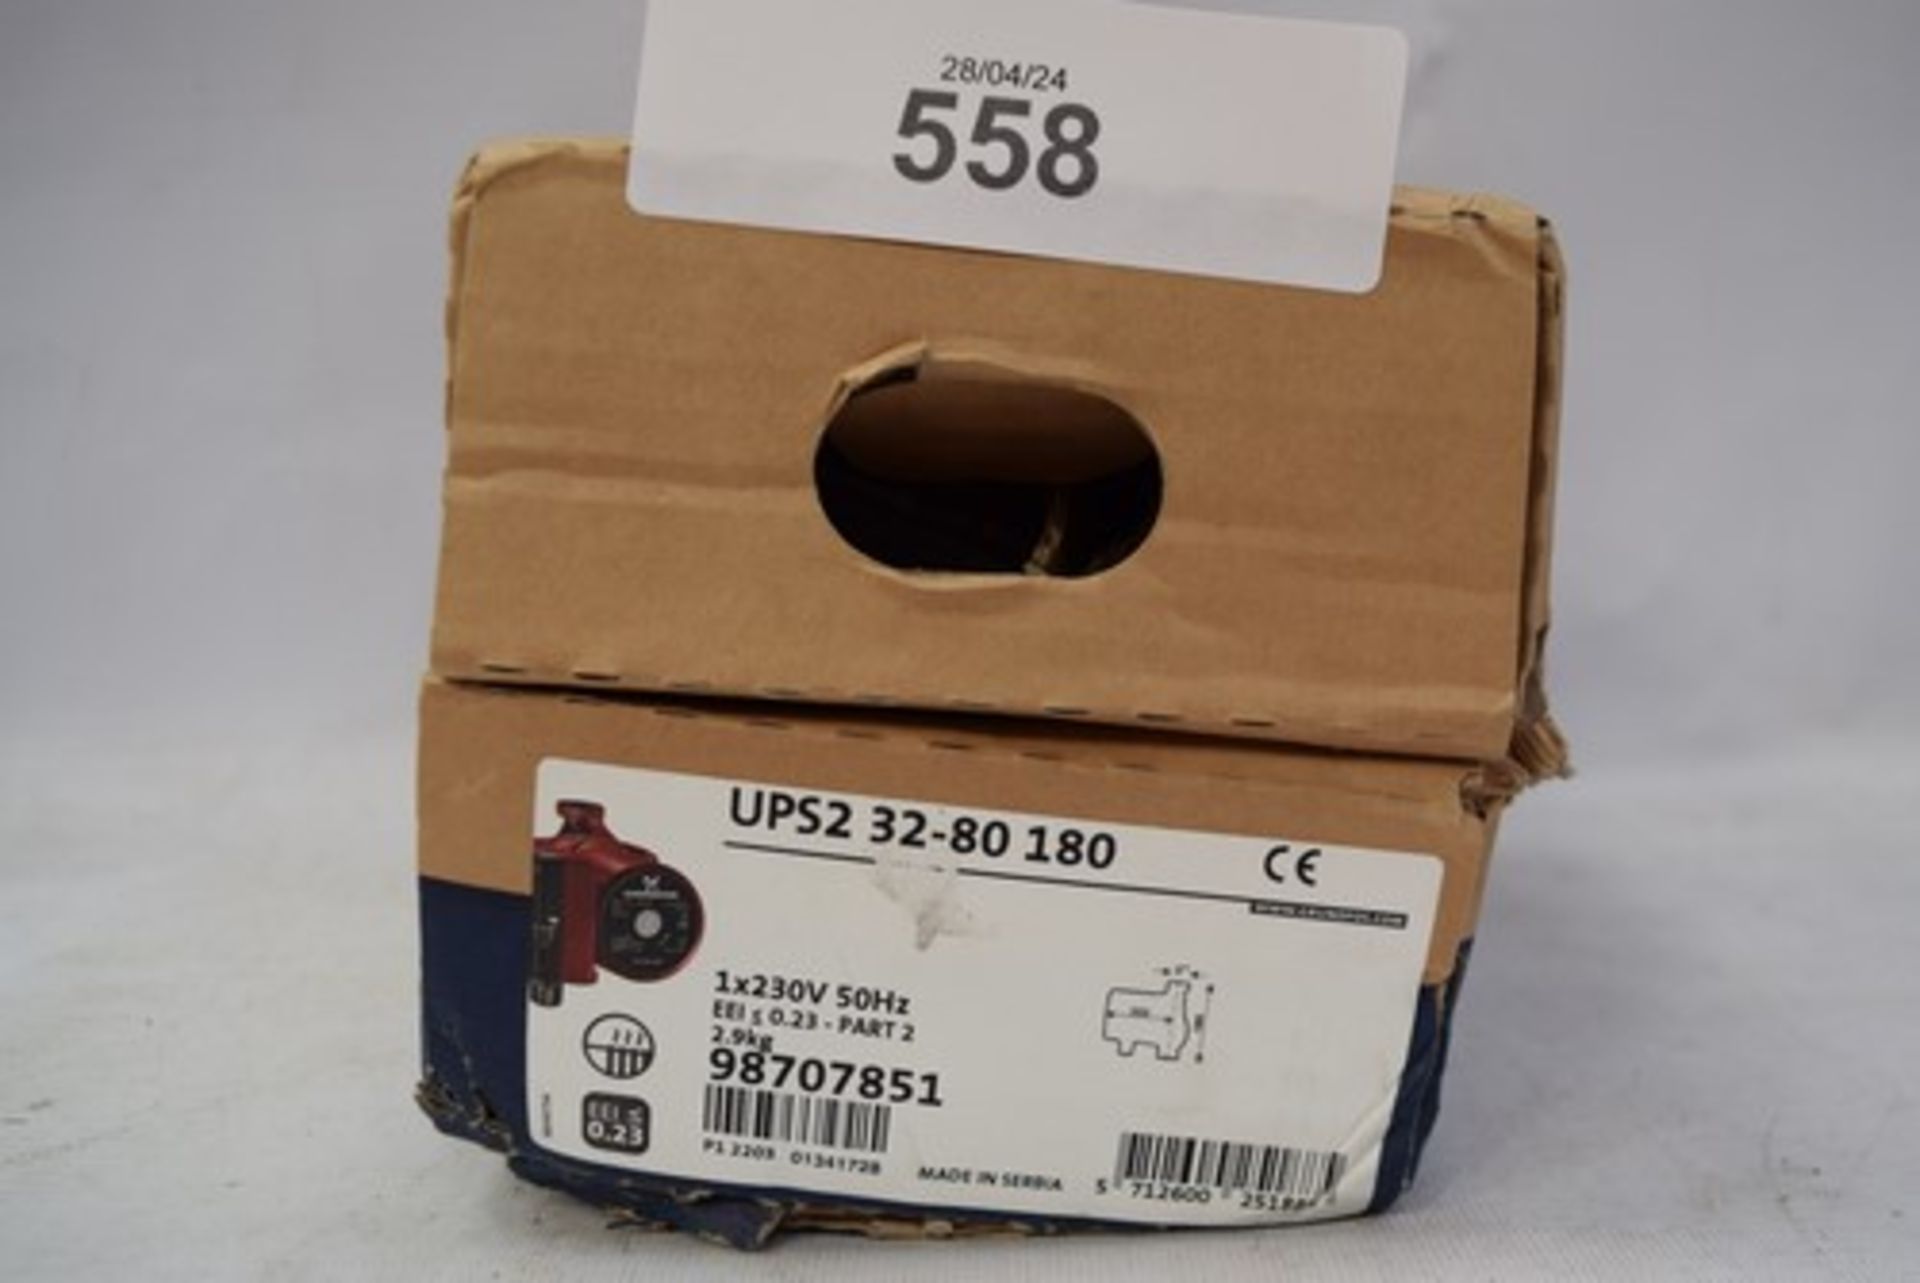 1 x Grundfos UPS 32-80 light commercial circulating pump - New in box (GS5)